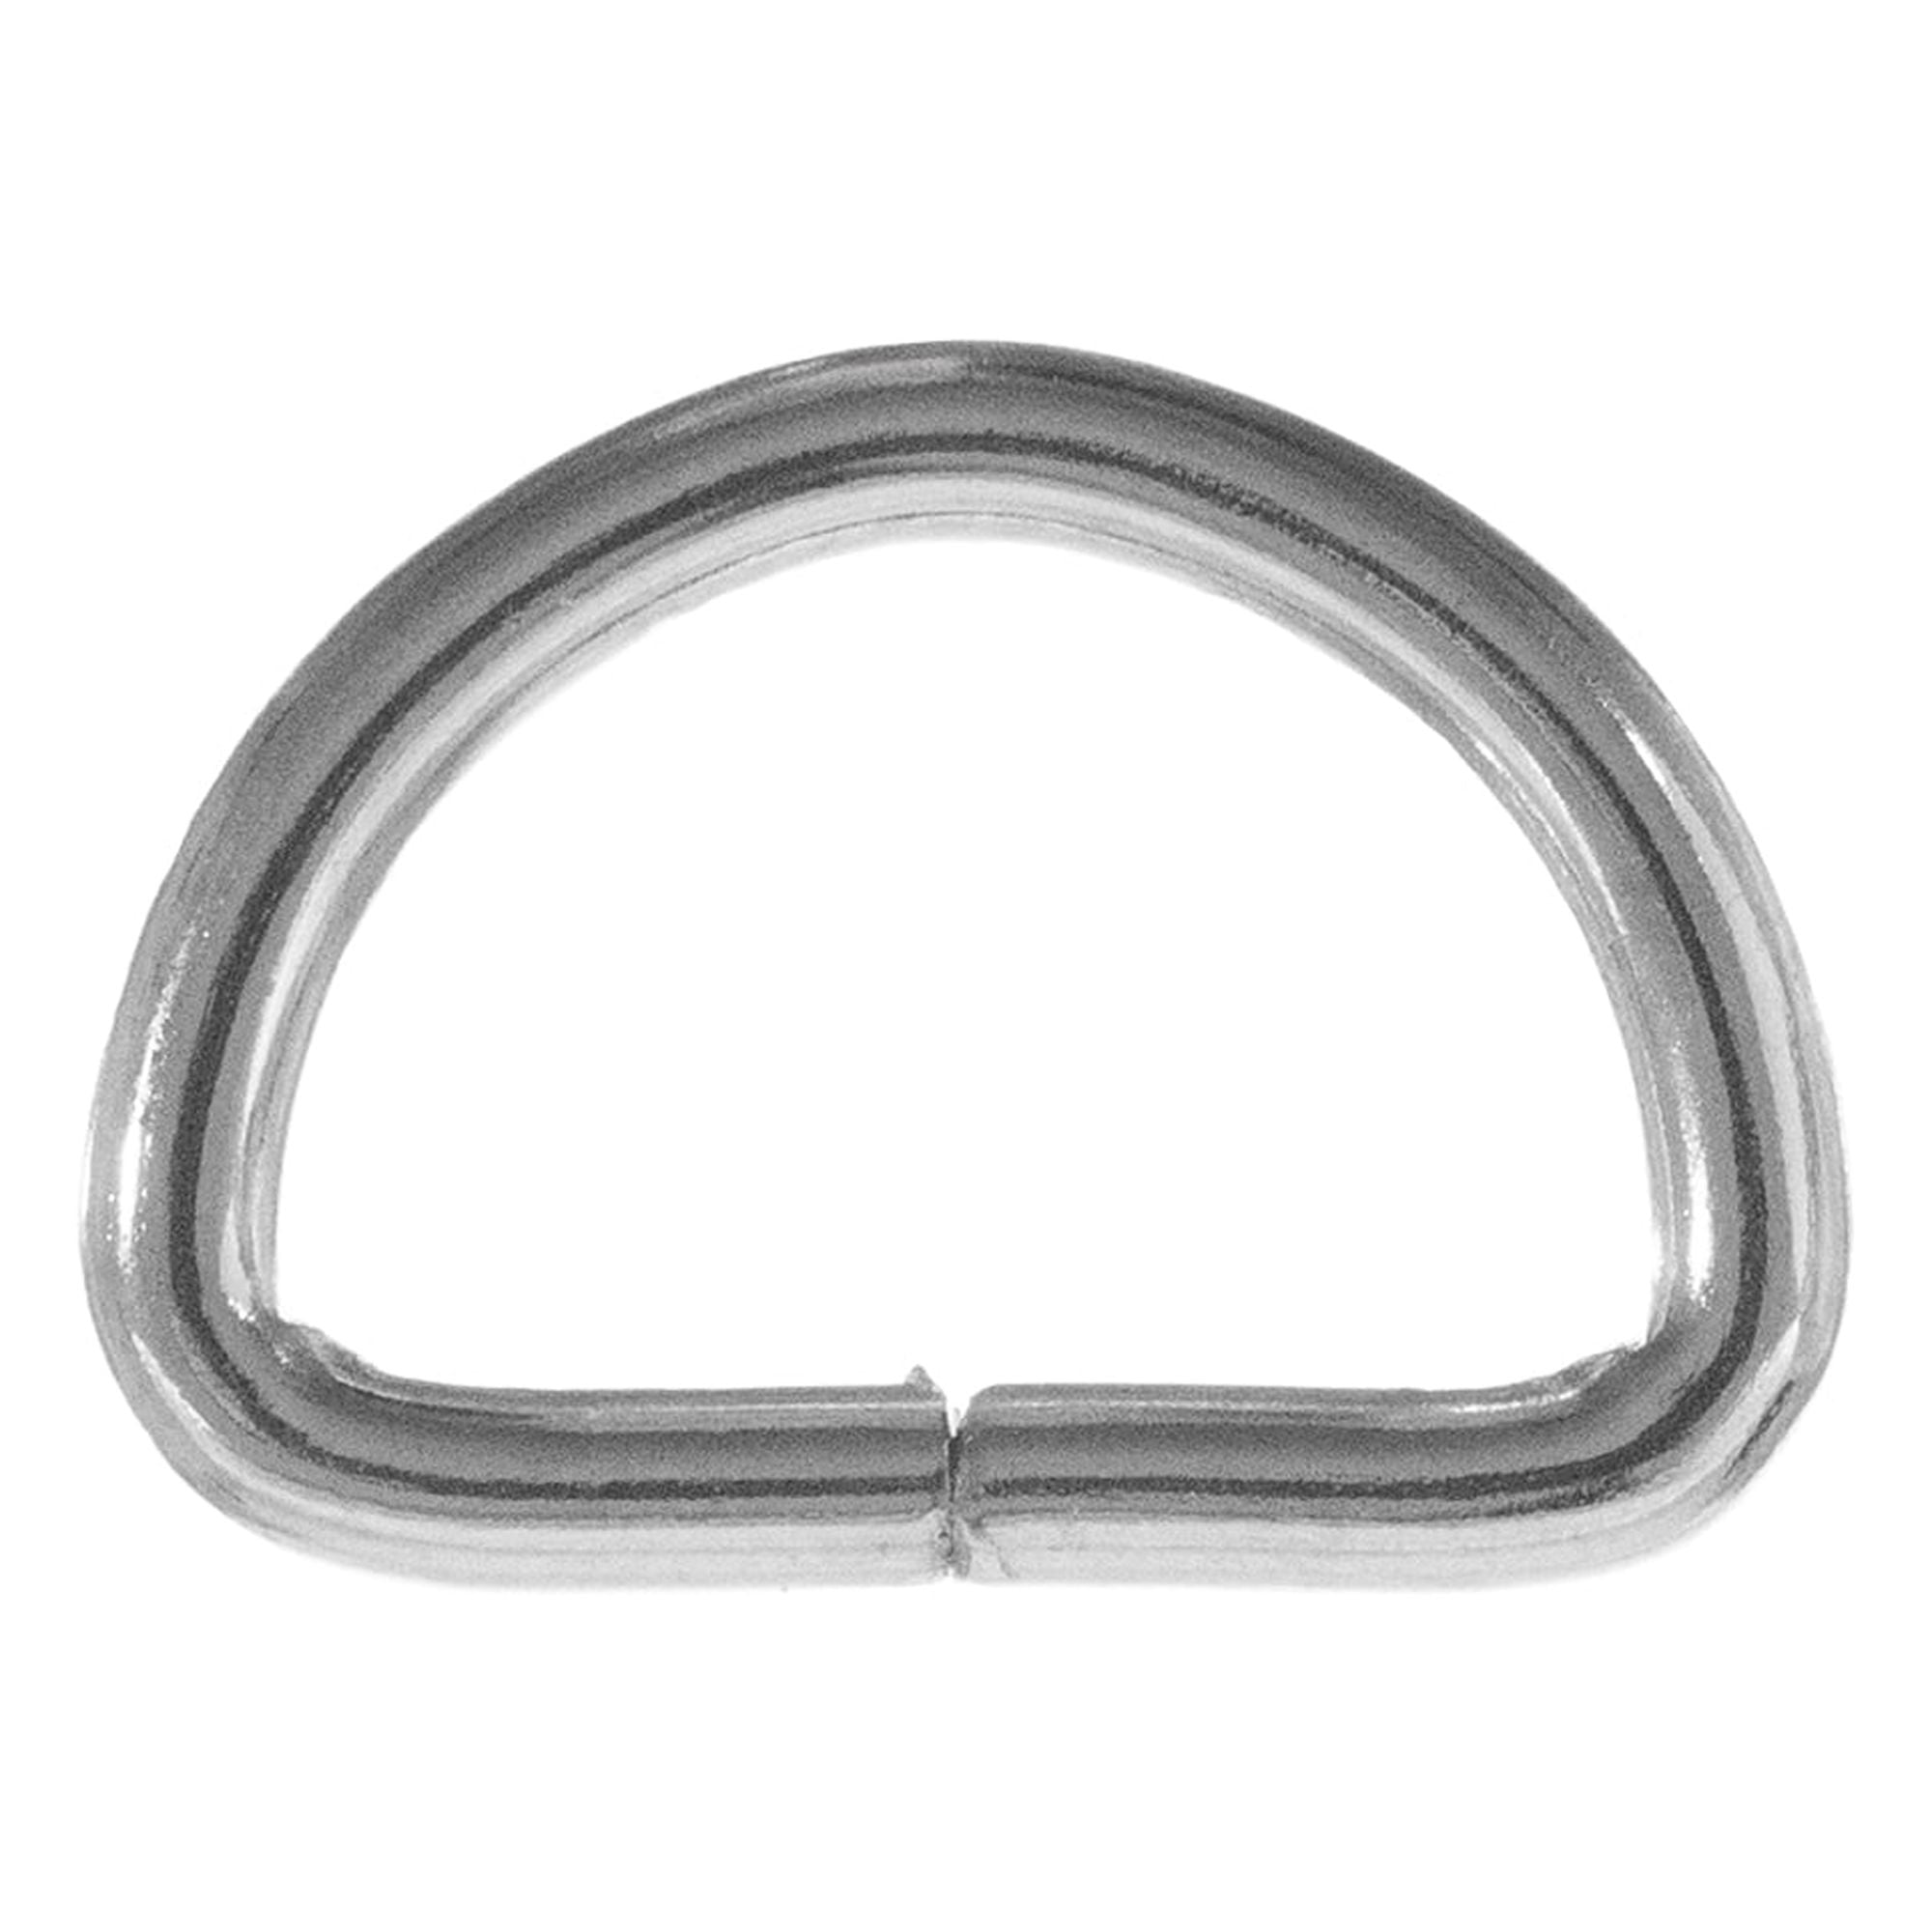 PARACORD PLANET - 1/2 Inch Metal D-Rings - Silver Metal Material - Size  Options of 5, 10, 25, 50, 100 Packs